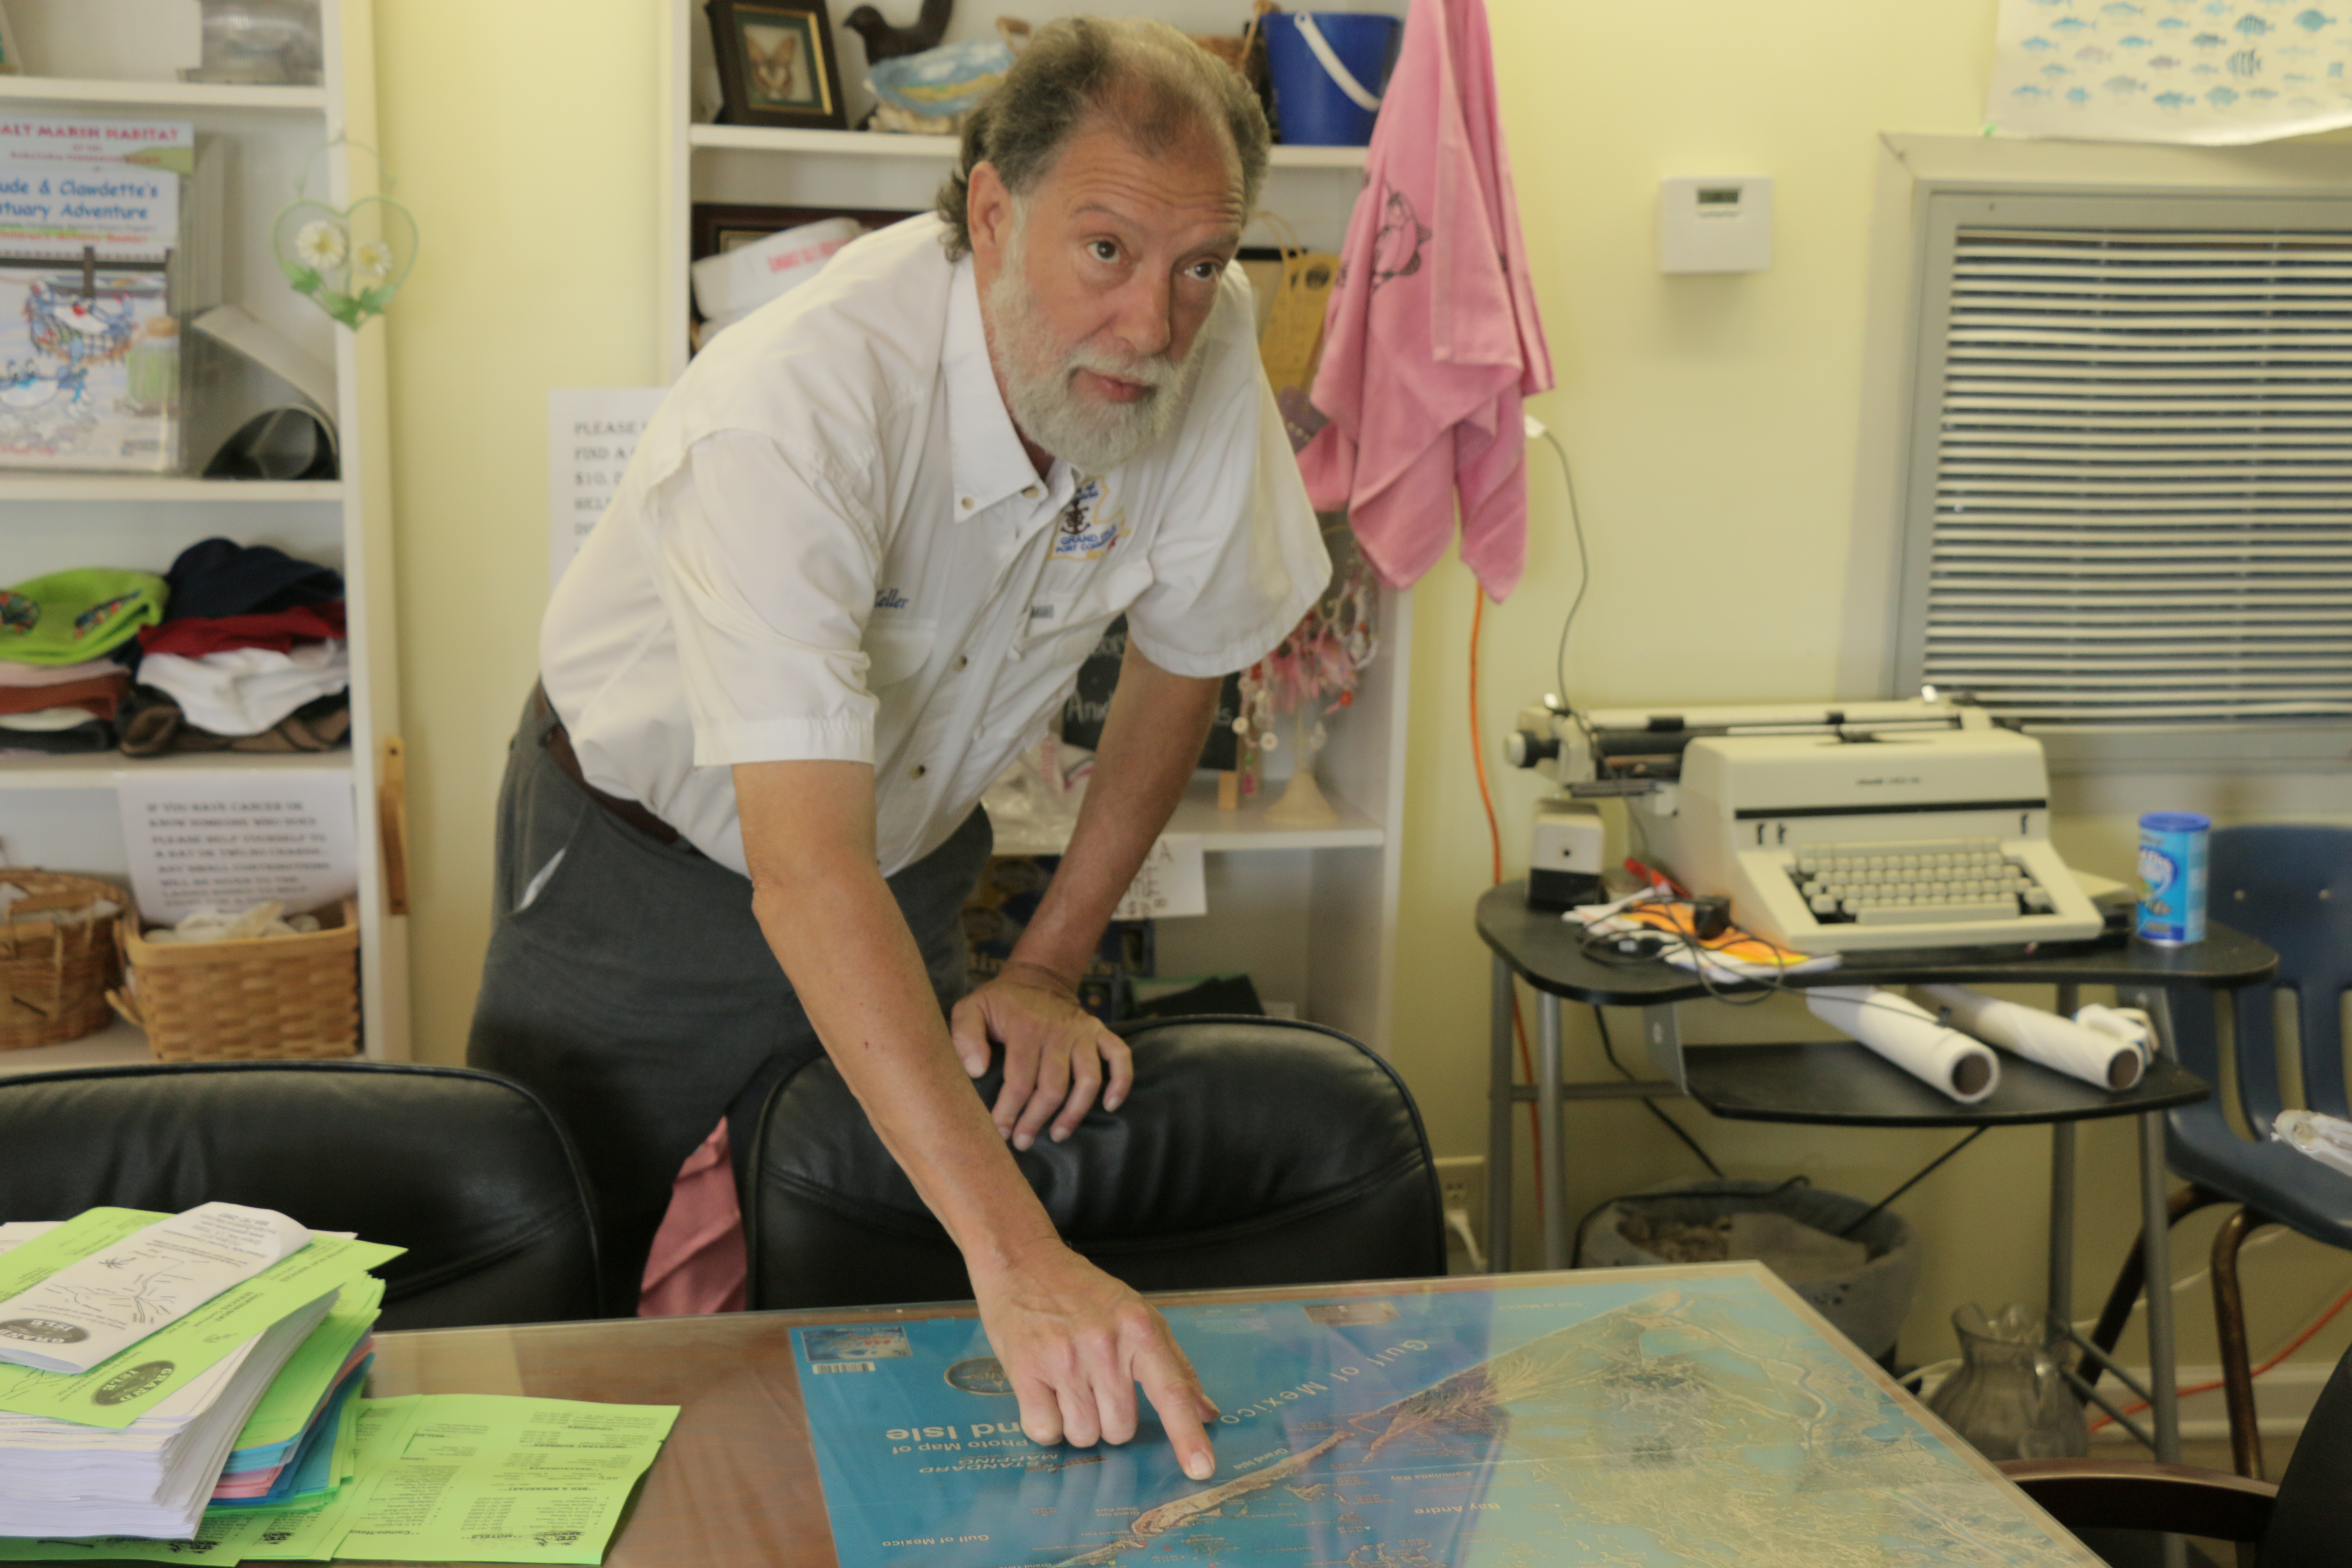 Grand Isle Port Director Wayne Keller describes the flow of the oil spill not just around Grand Isle but neighboring barrier islands.  Keller at times was frustrated and hampered at times by the restrictions he encountered during the cleanup effort.